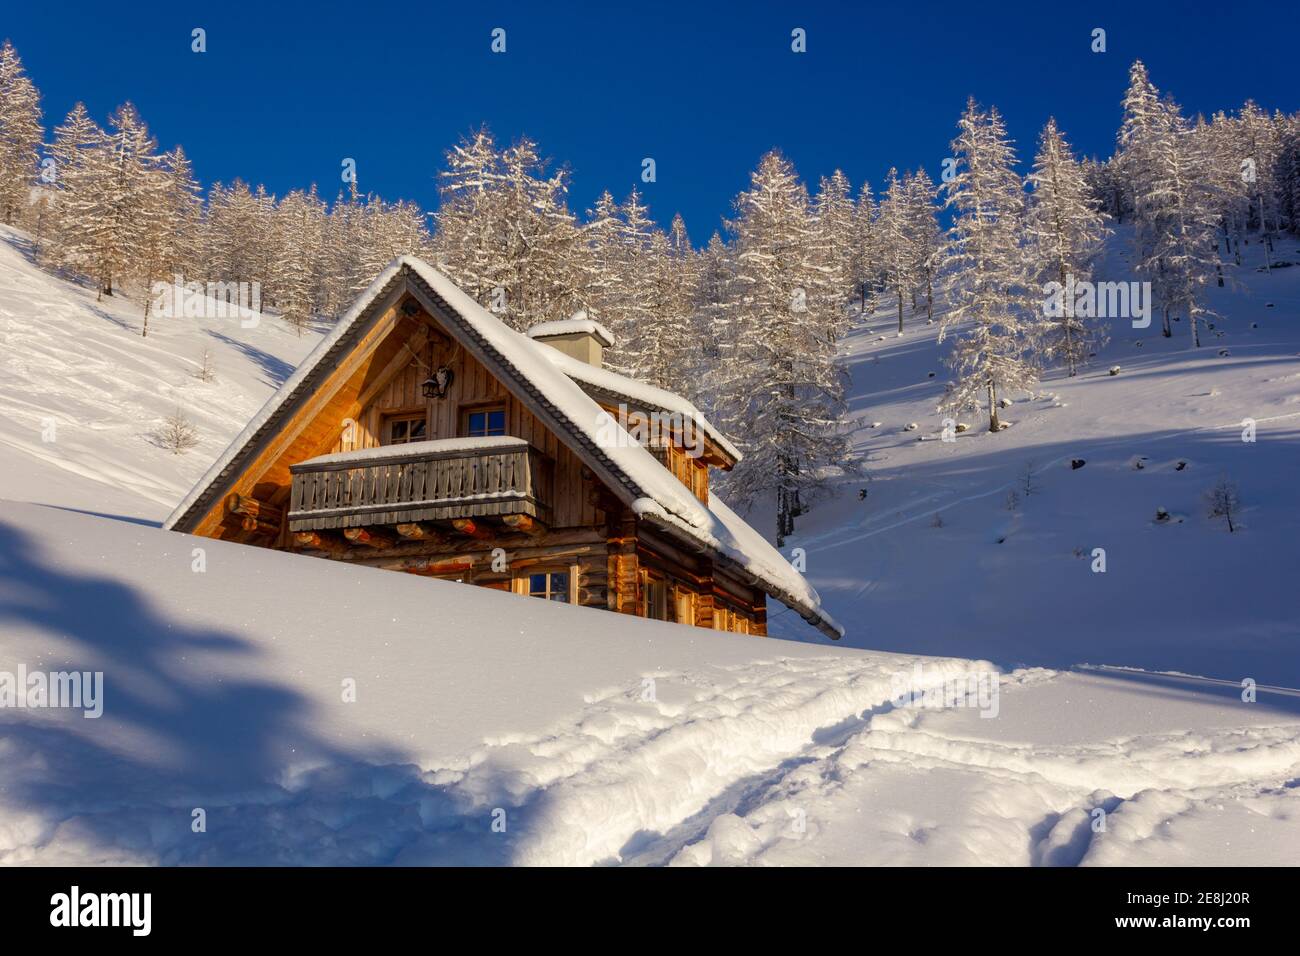 Frozen landscape with austrian log cabin and snowy larch trees in the background Stock Photo